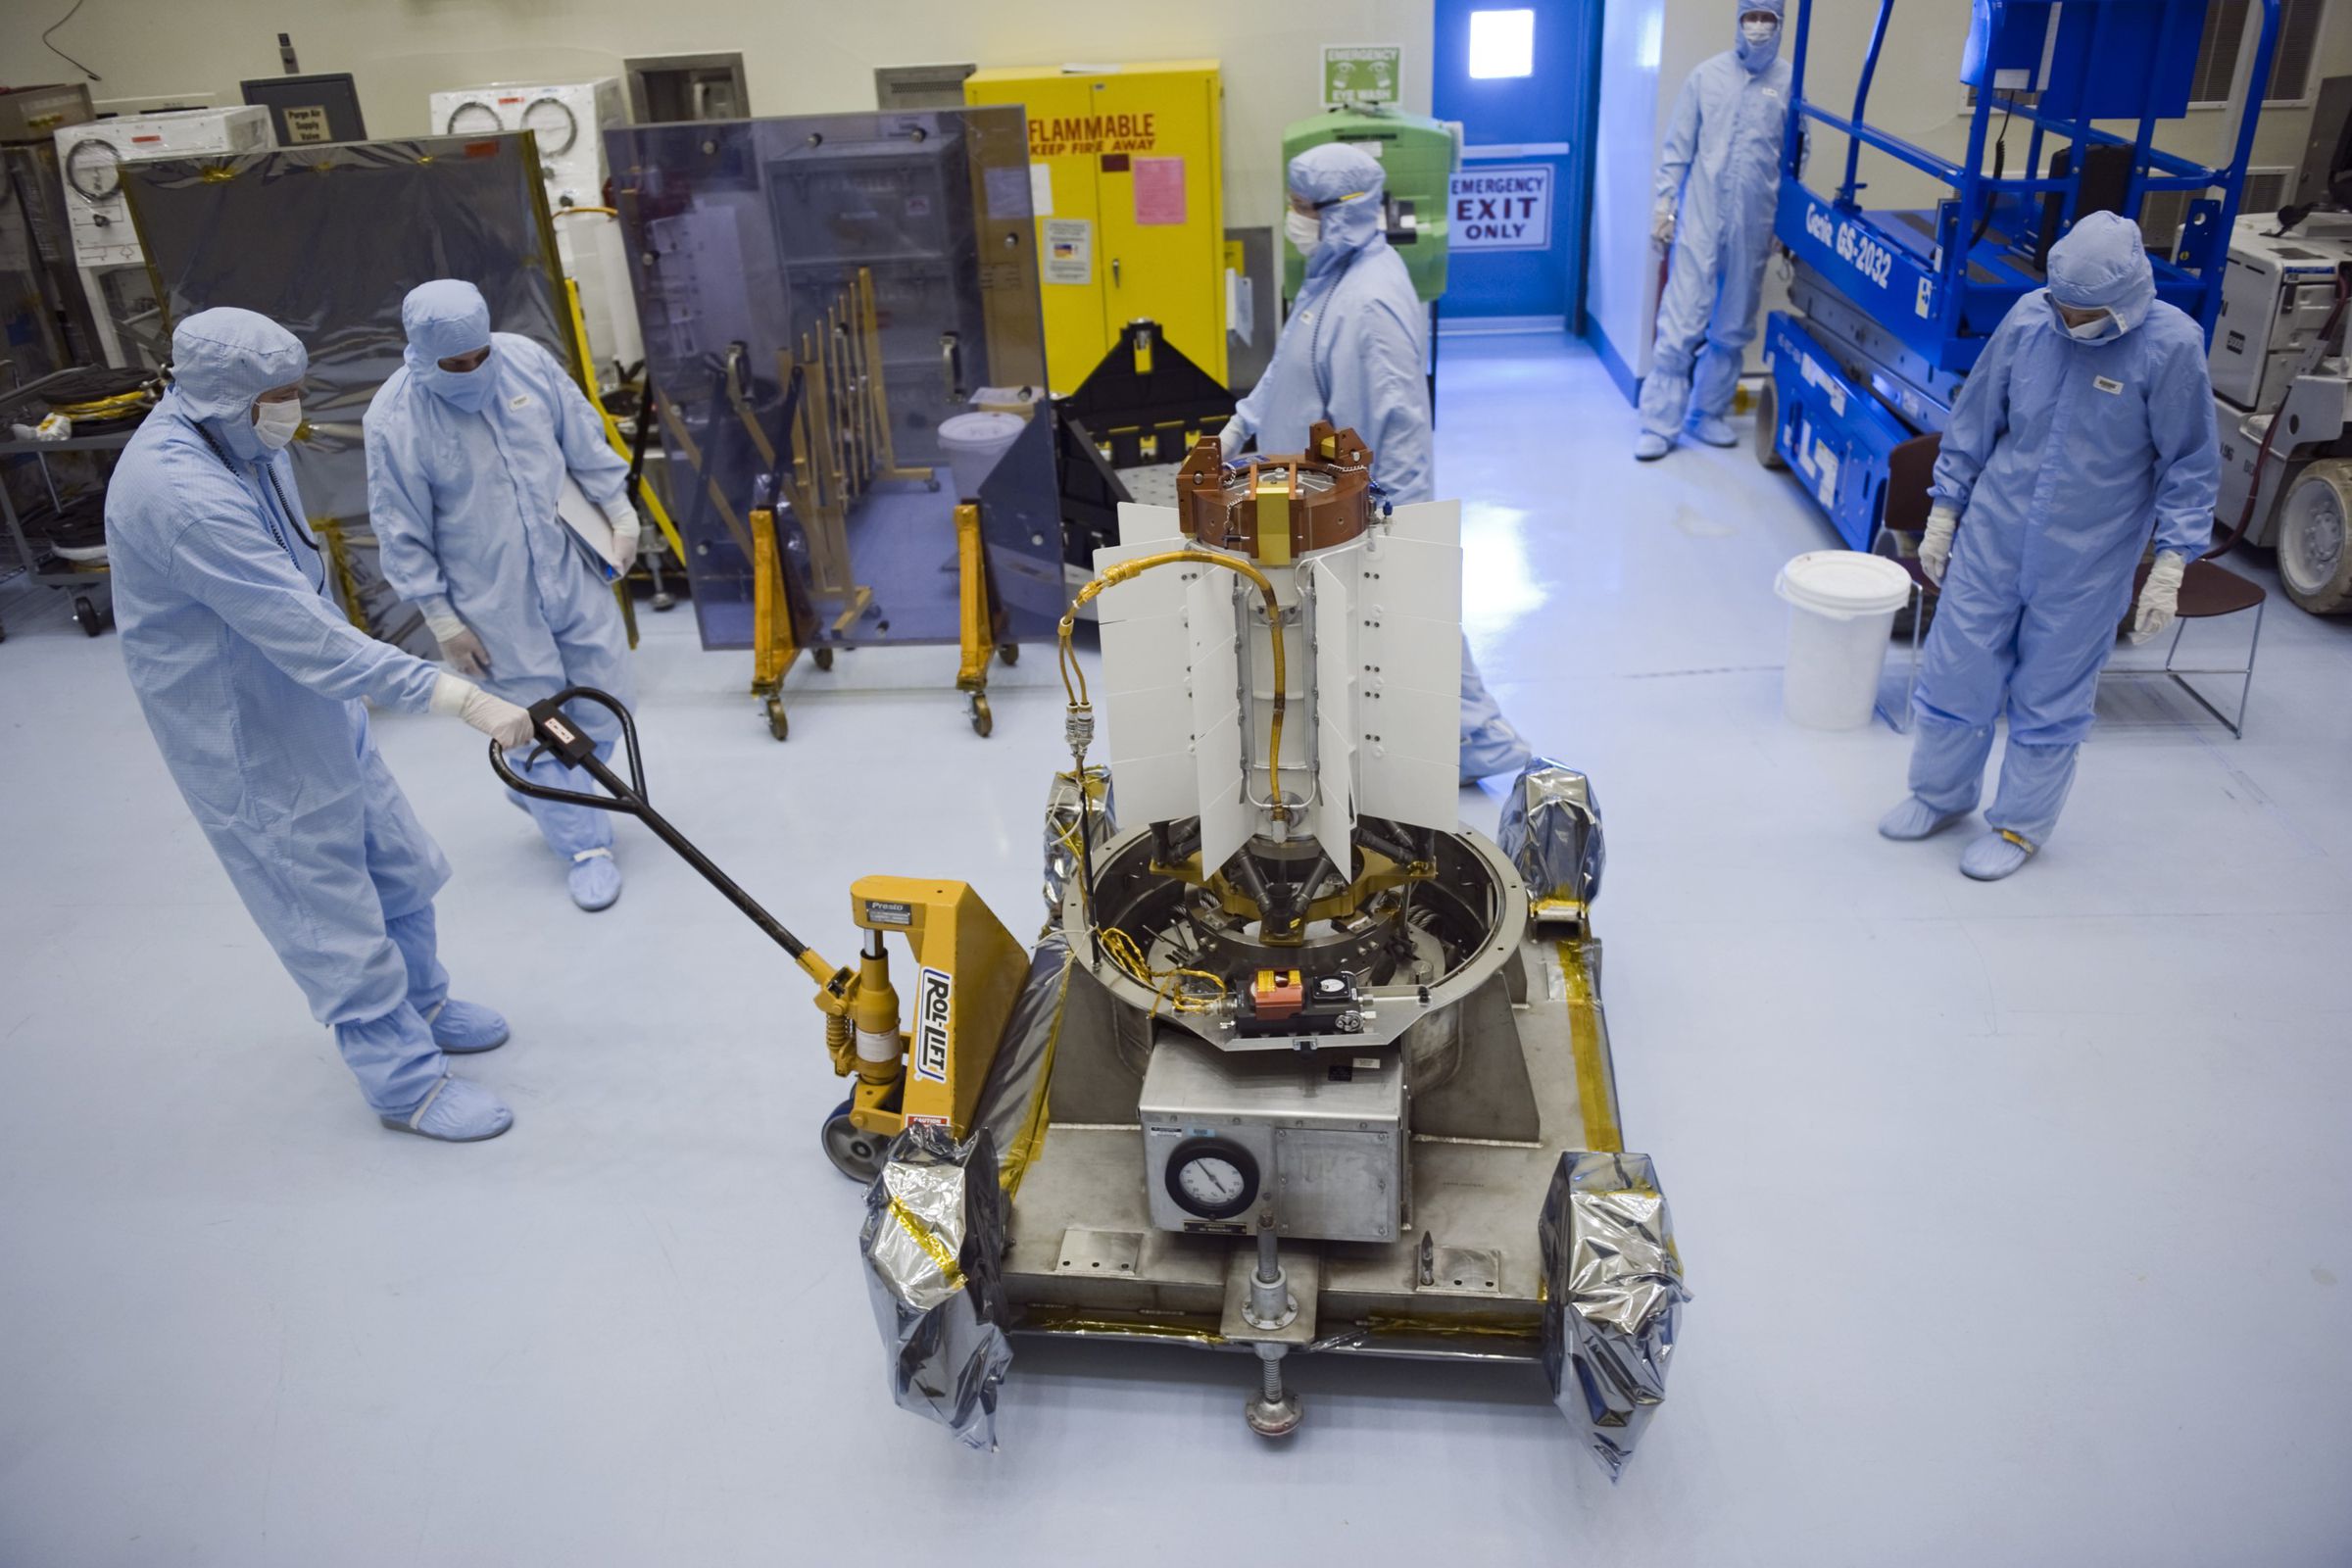 The RTG that was used for NASA’s Curiosity rover